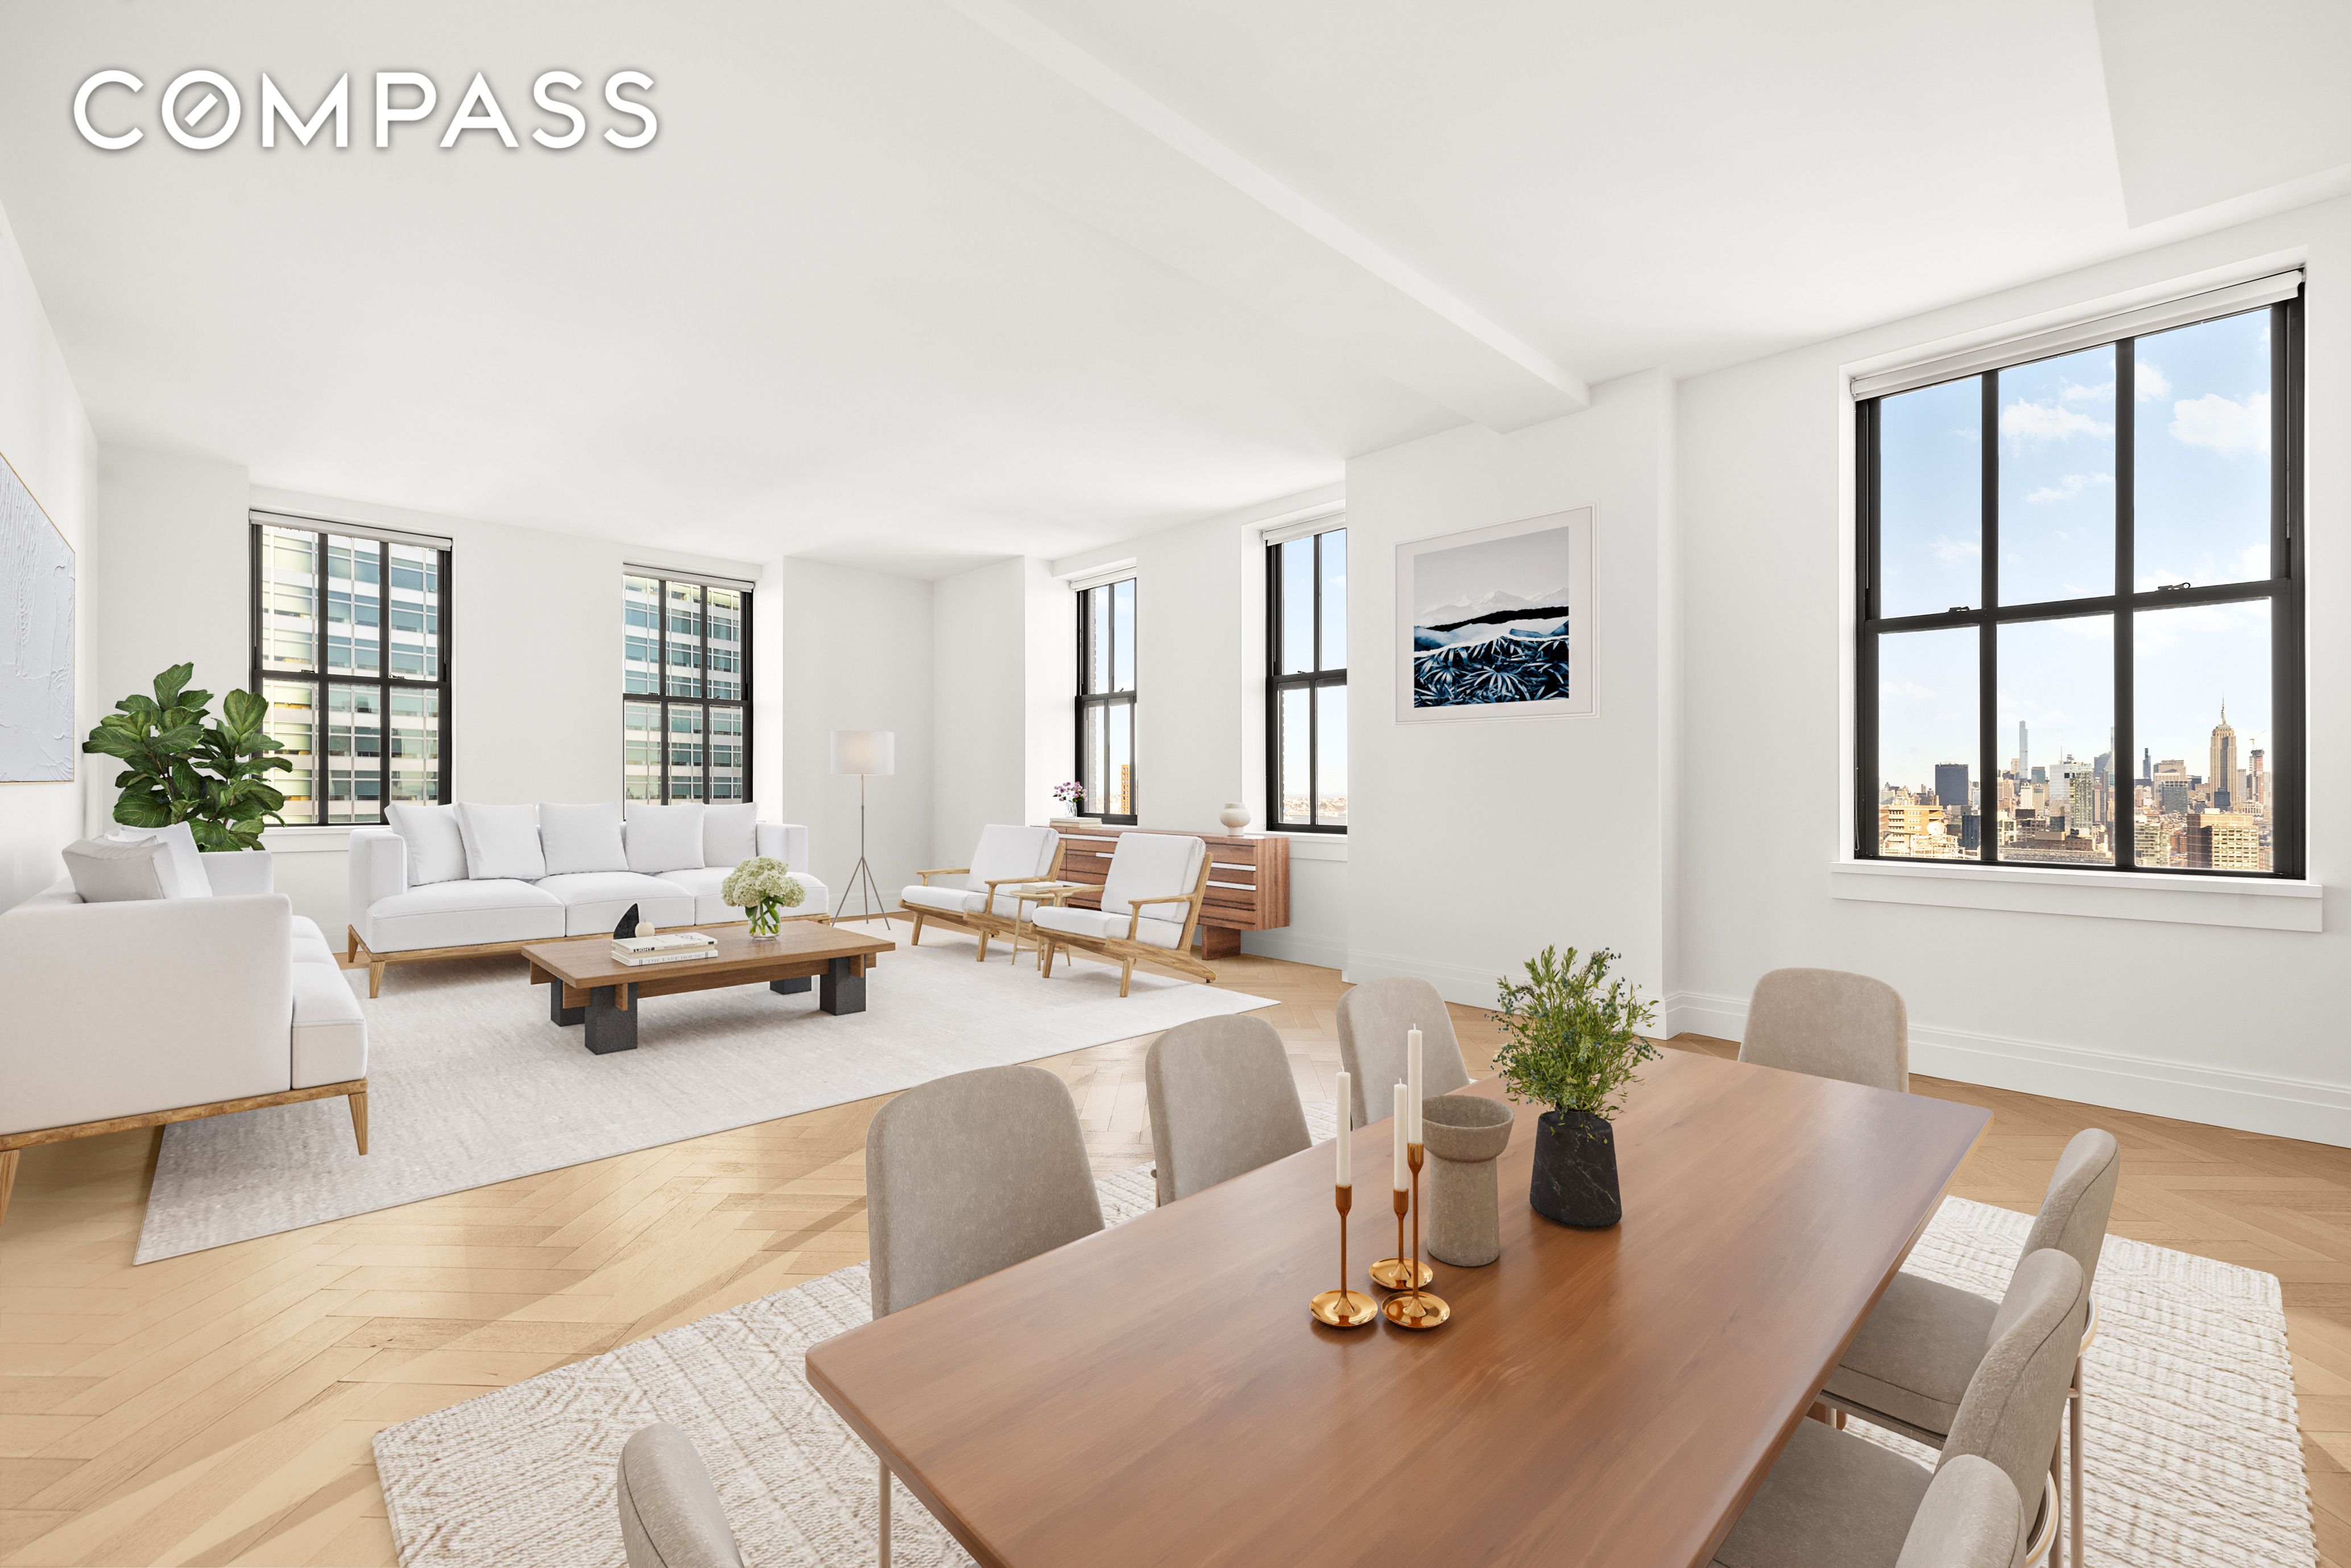 100 Barclay Street B27, Tribeca, Downtown, NYC - 4 Bedrooms  
4 Bathrooms  
8 Rooms - 